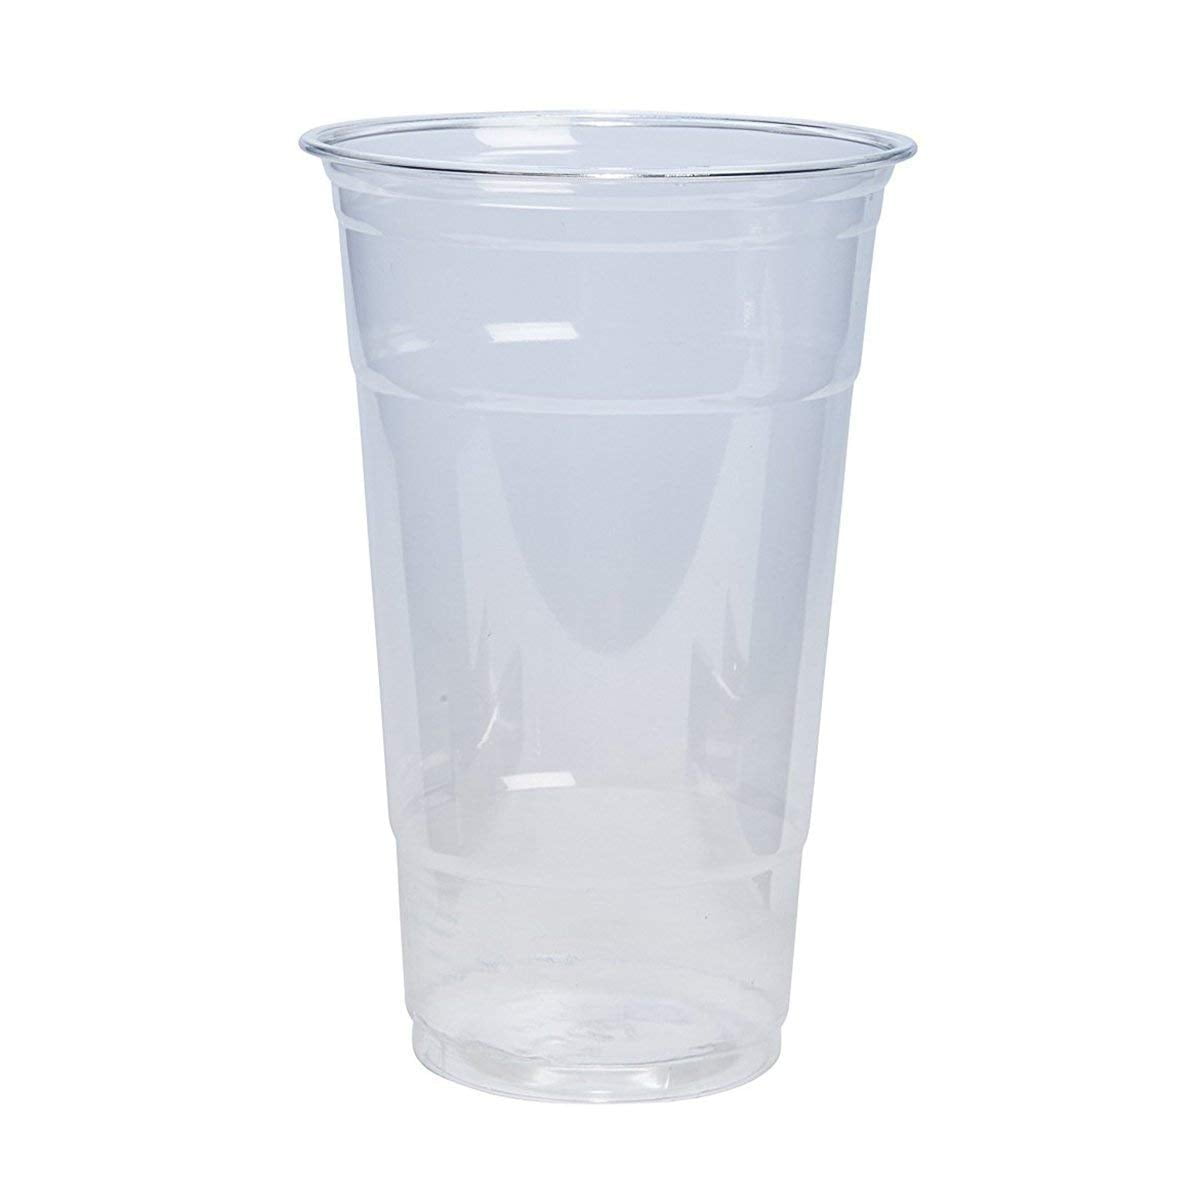 High Transparency Pet 16oz Cup Plastic Reusable Water Cups for